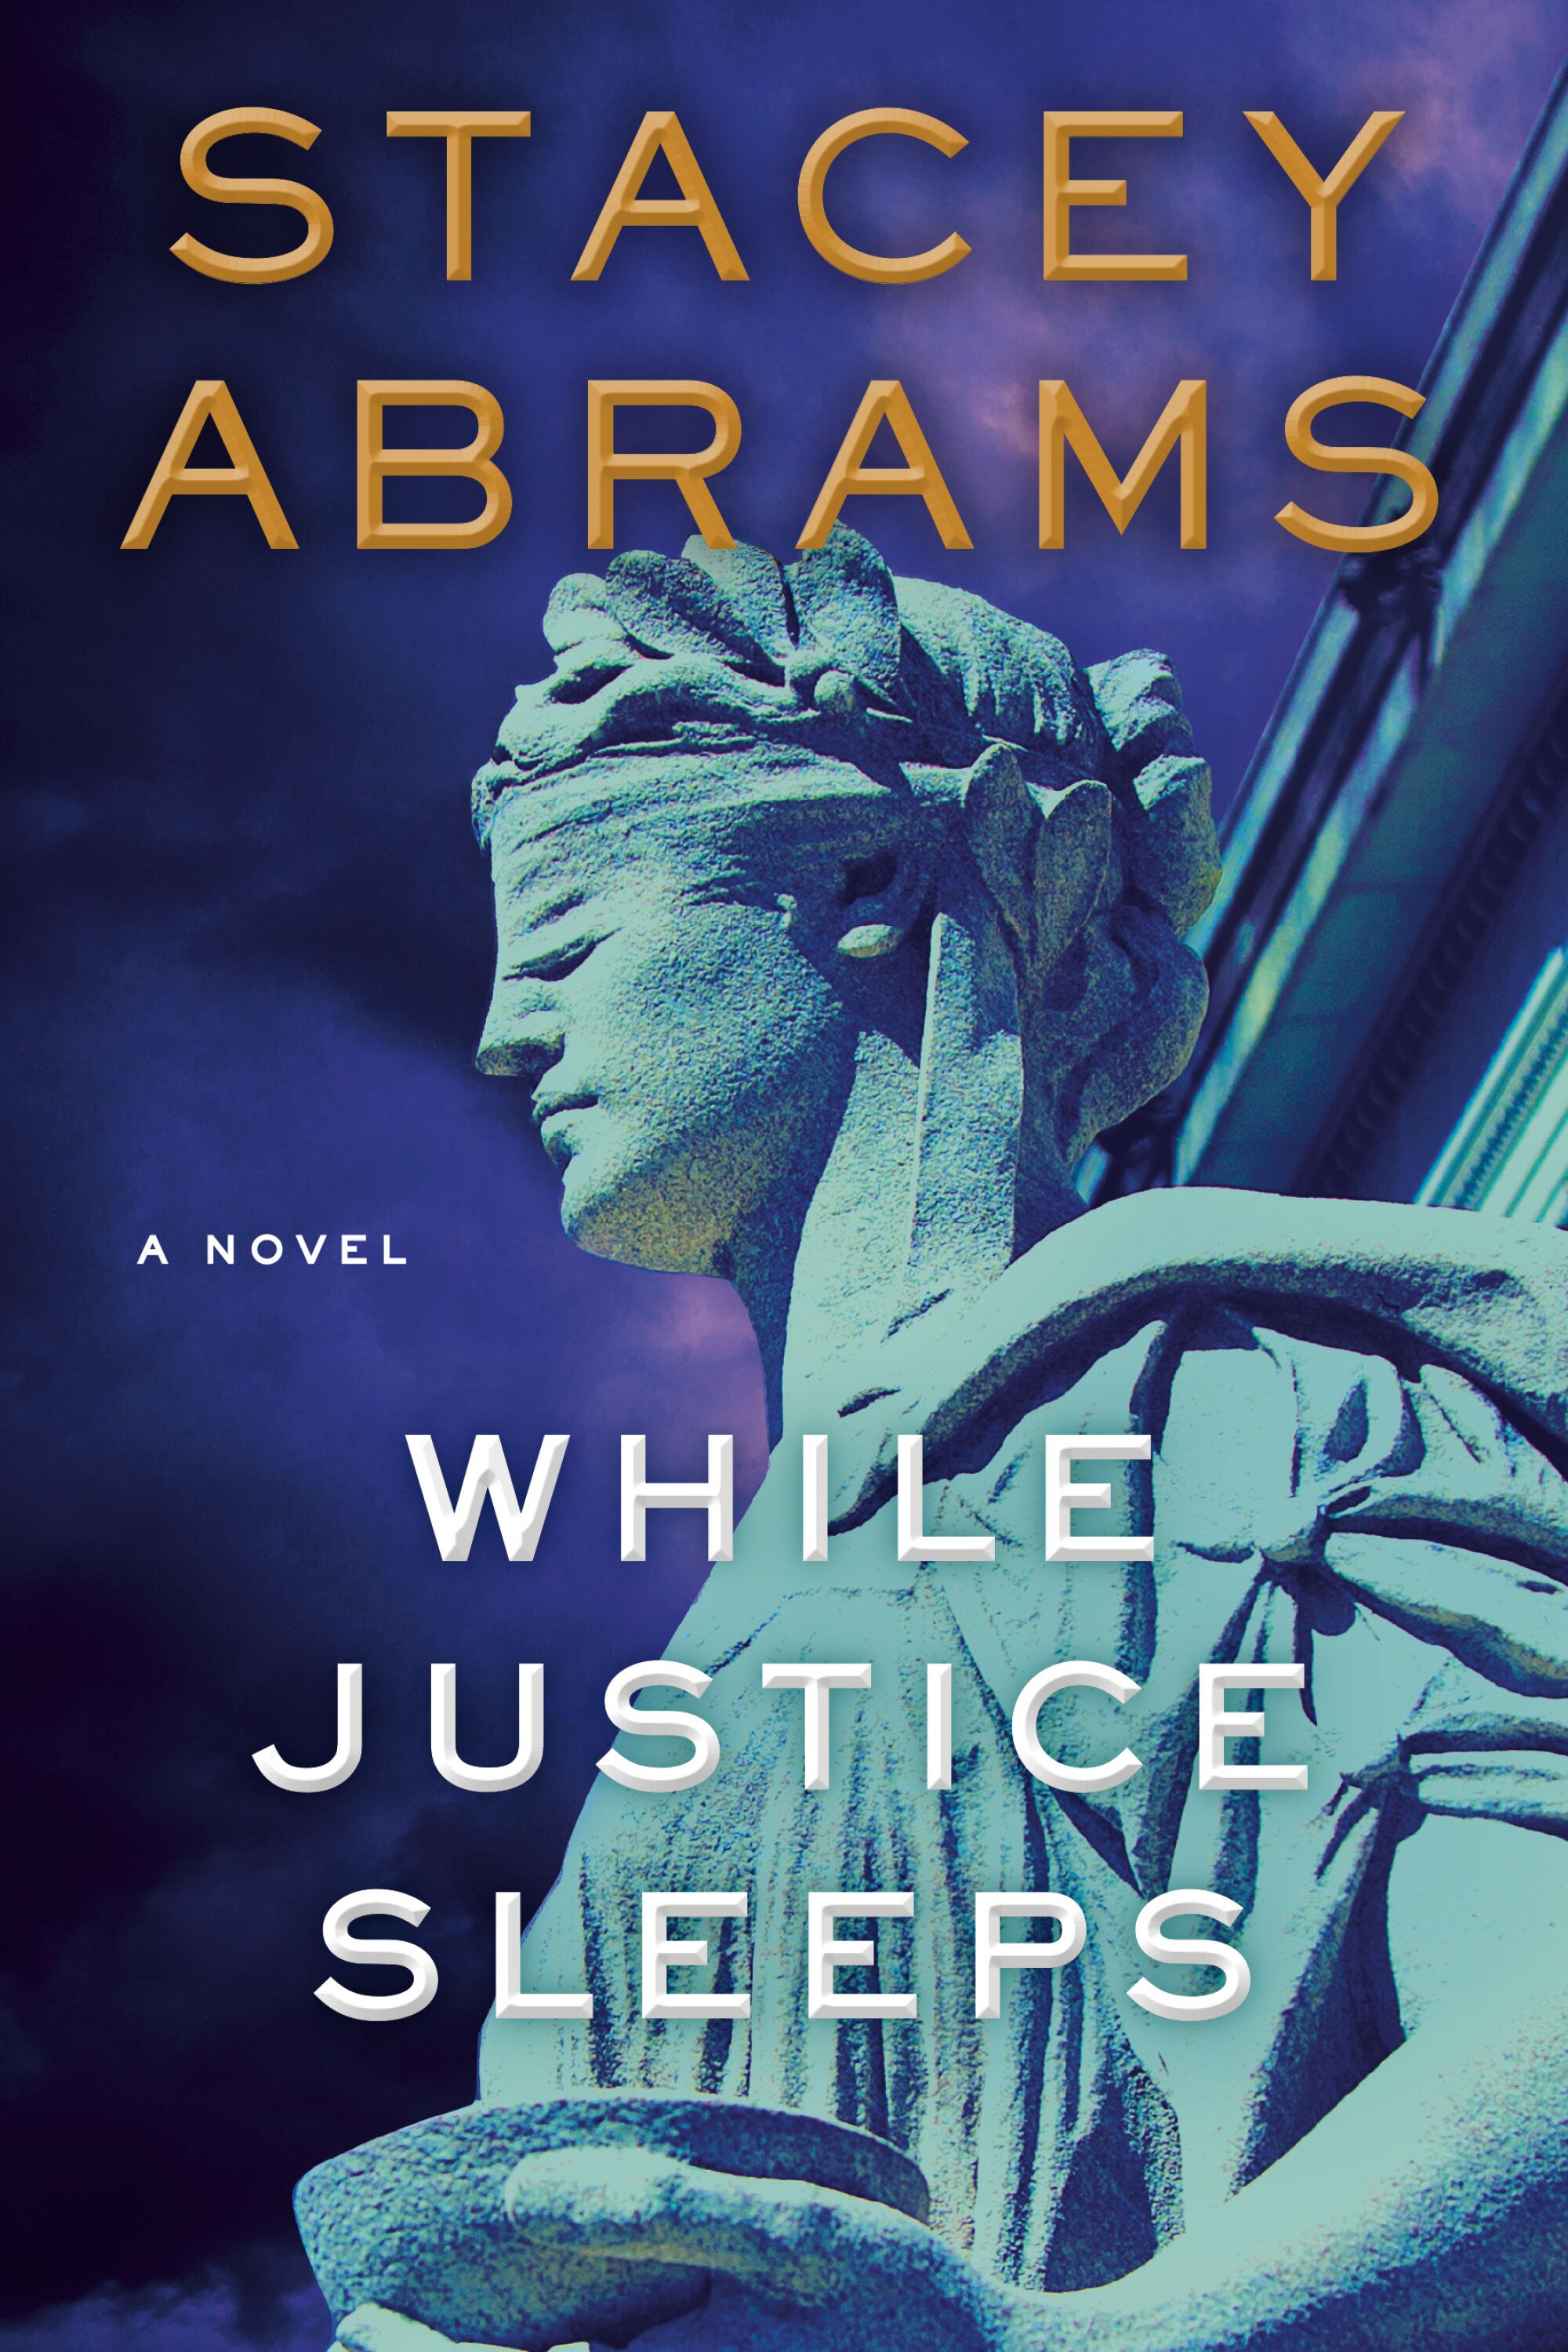 "While Justice Sleeps," by Stacey Abrams